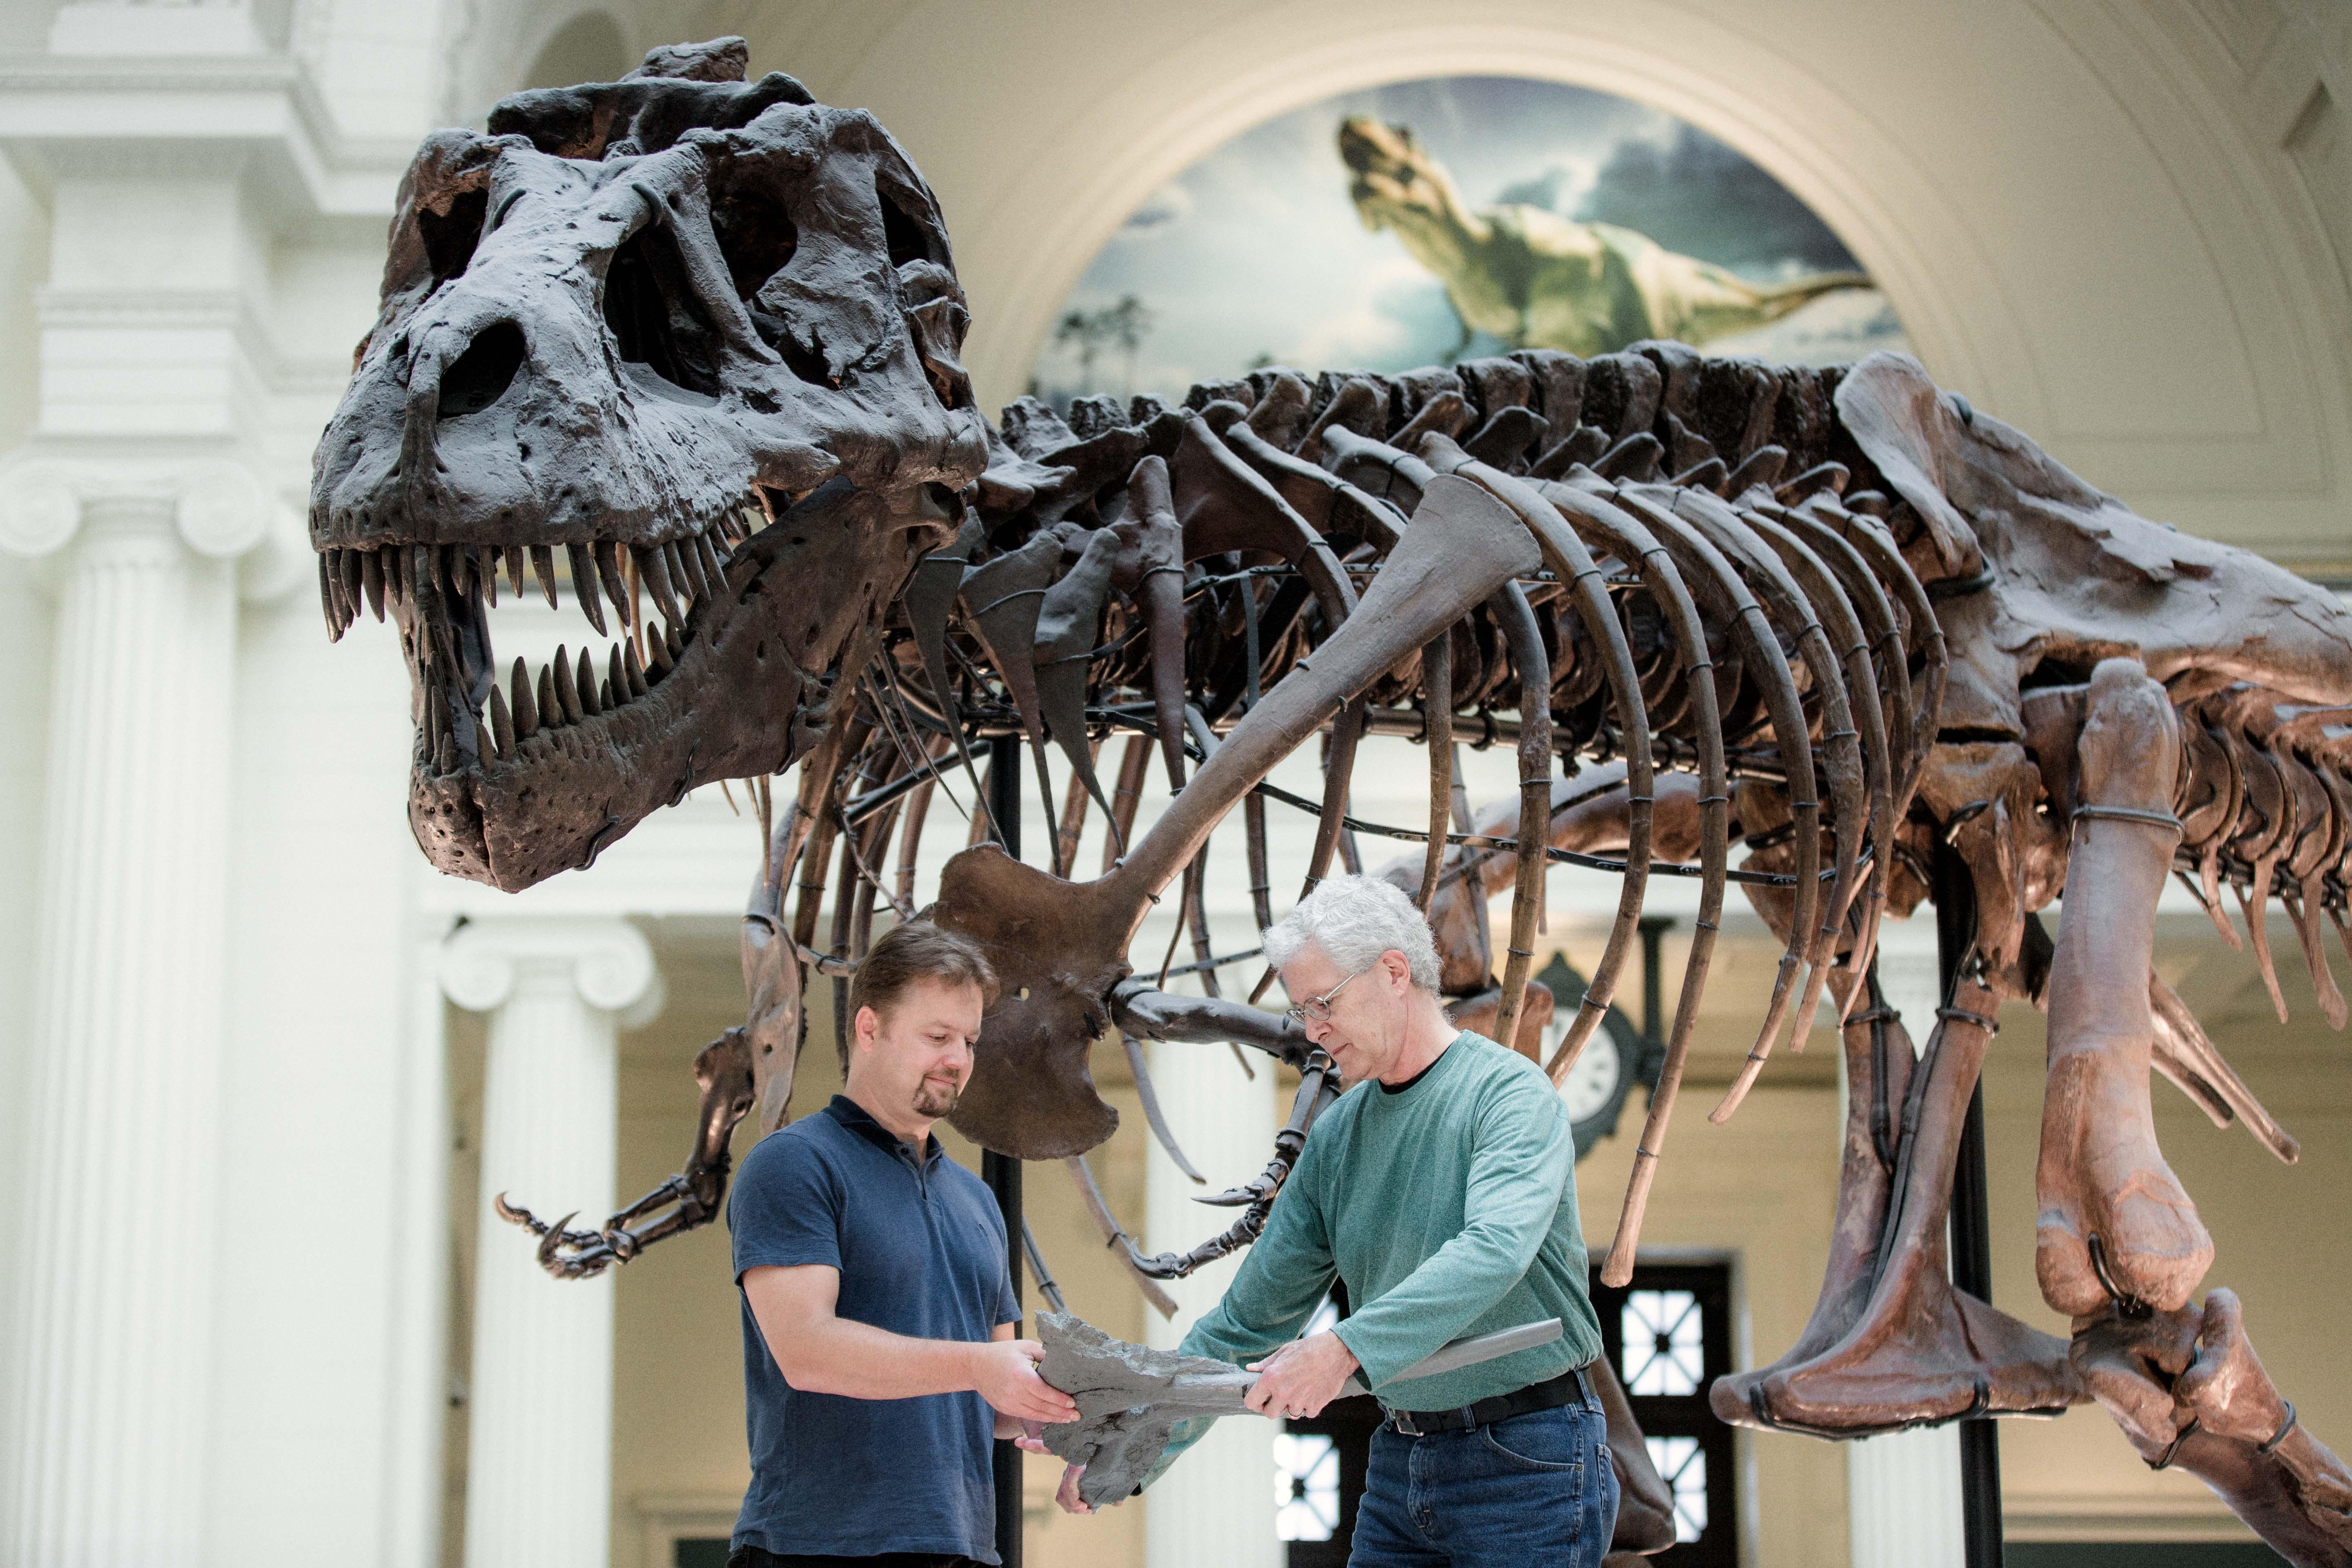 Field Museum scientists Pete Makovicky, left, and Bill Simpson use a cast of one of Sue’s gastralia to show where they will be positioned on her skeleton. (Zachary James Johnston / The Field Museum)